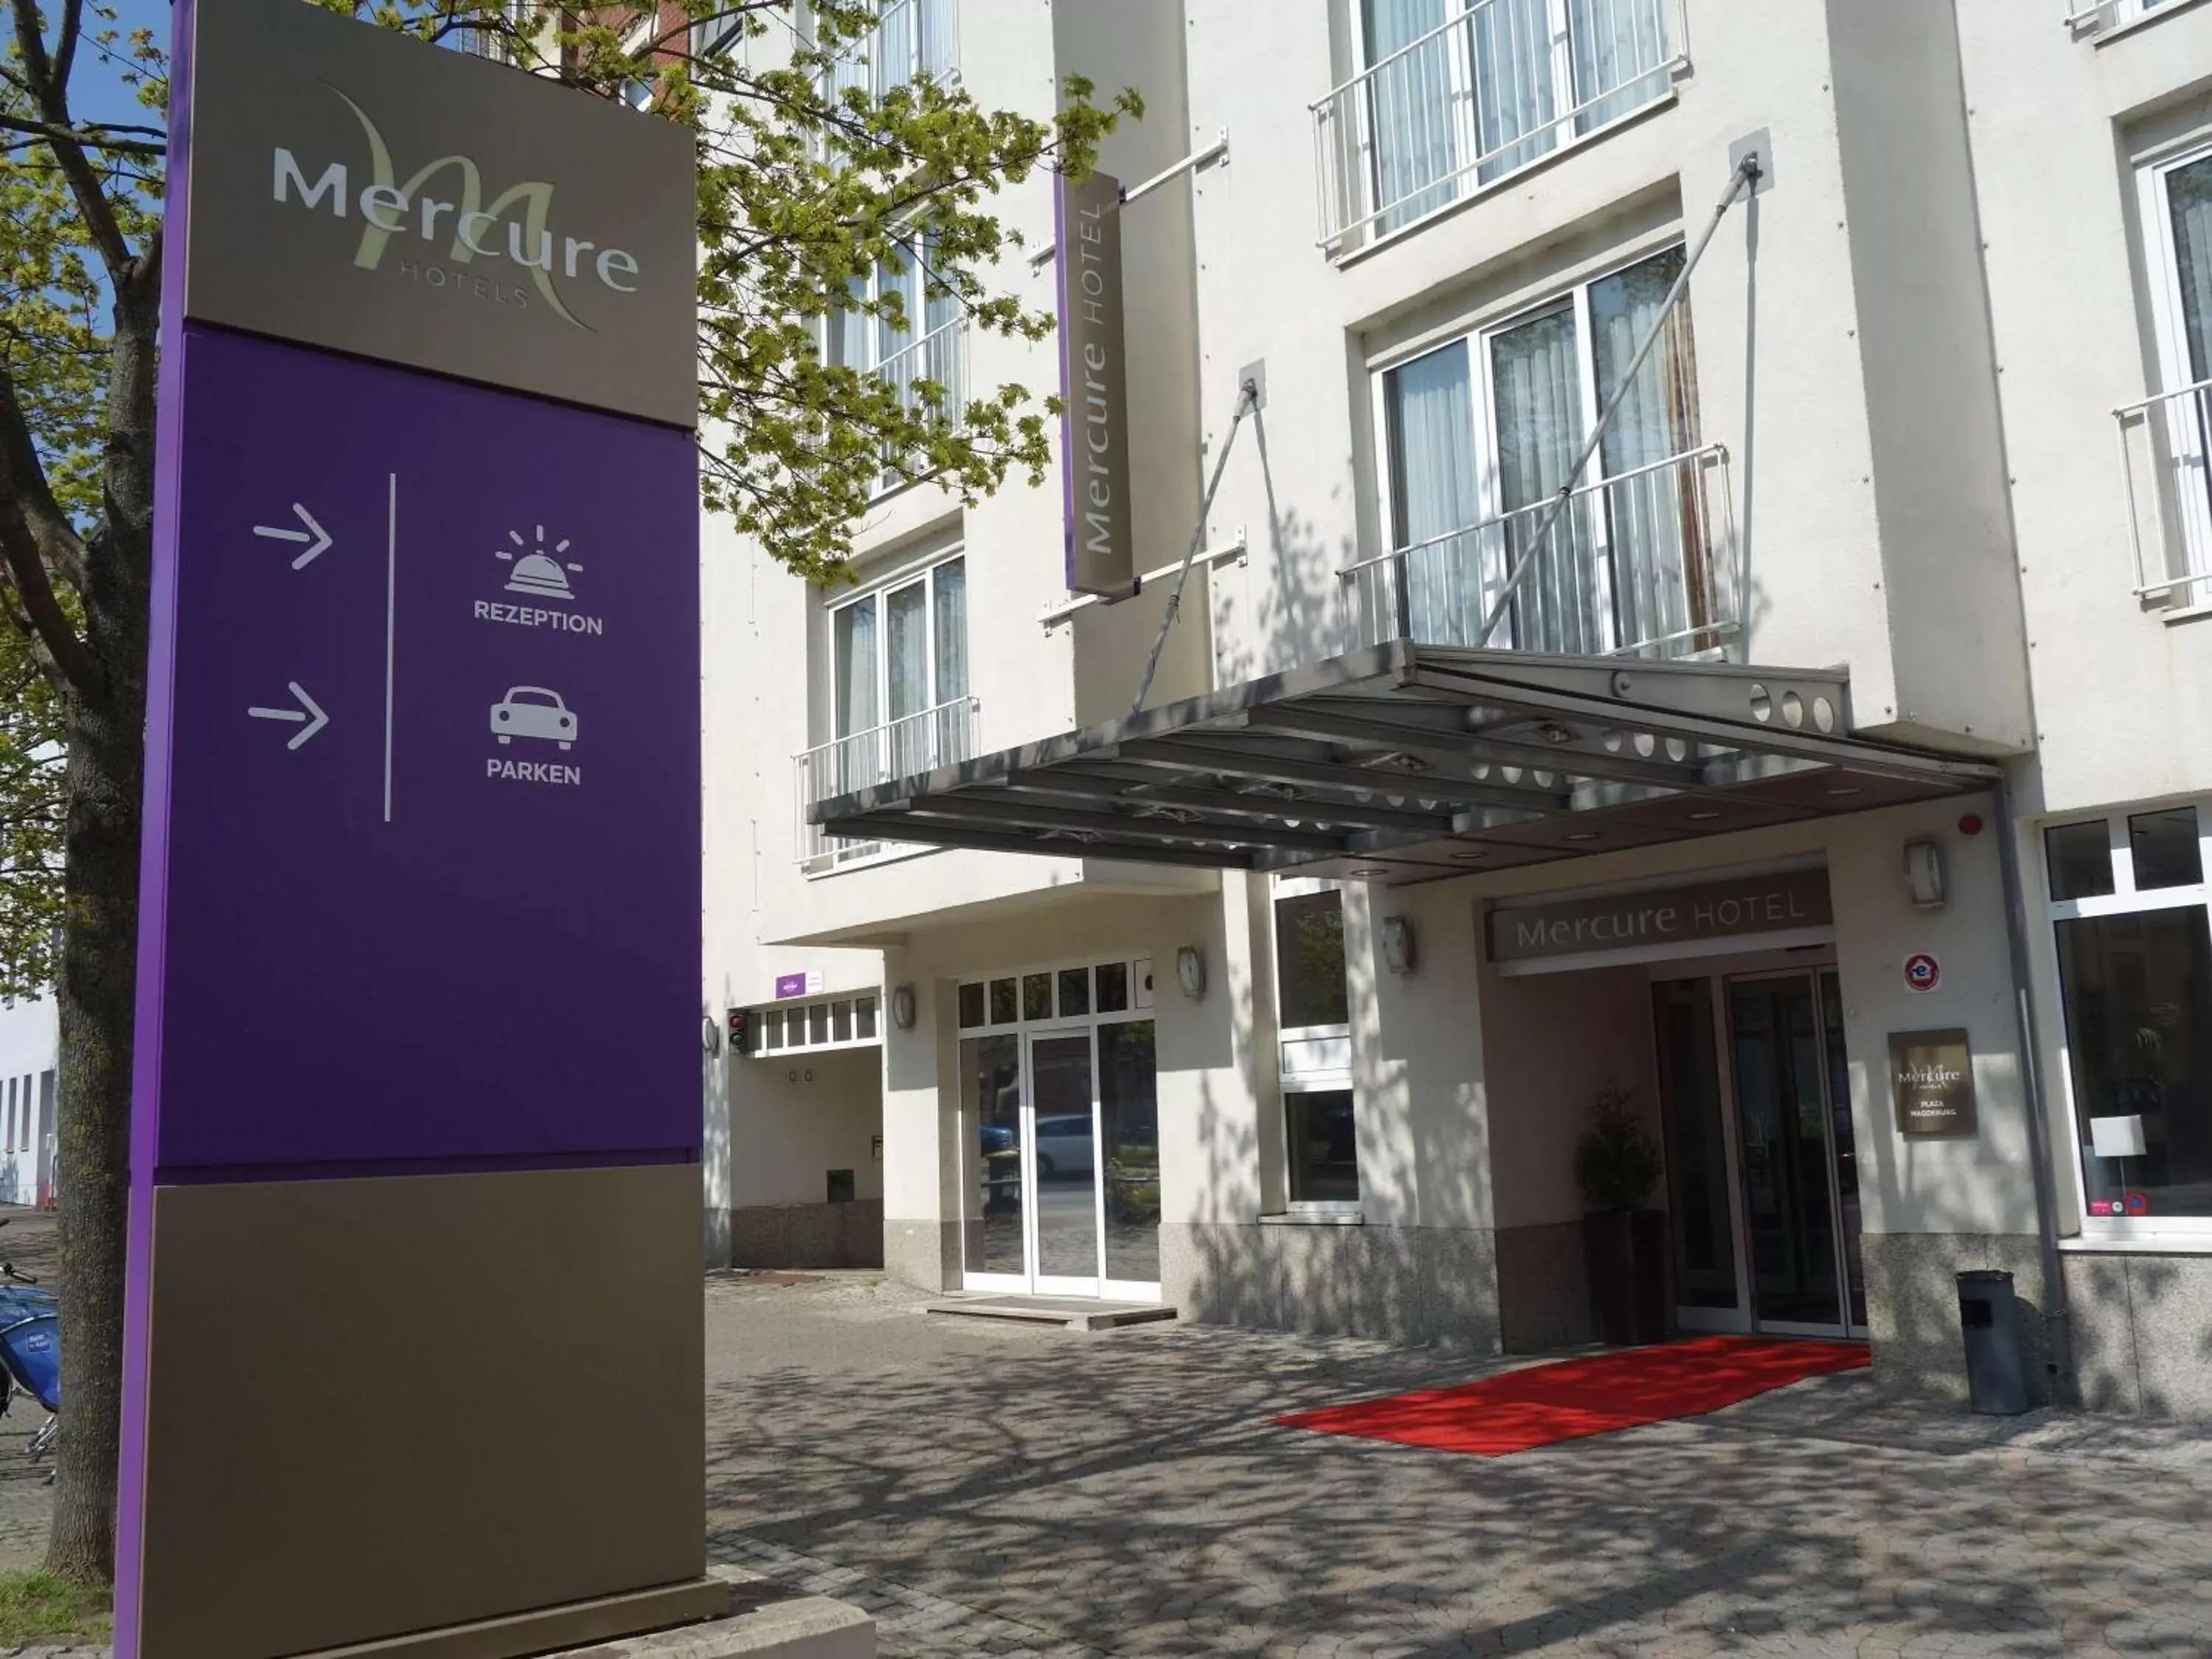 Property building in Mercure Hotel Plaza Magdeburg